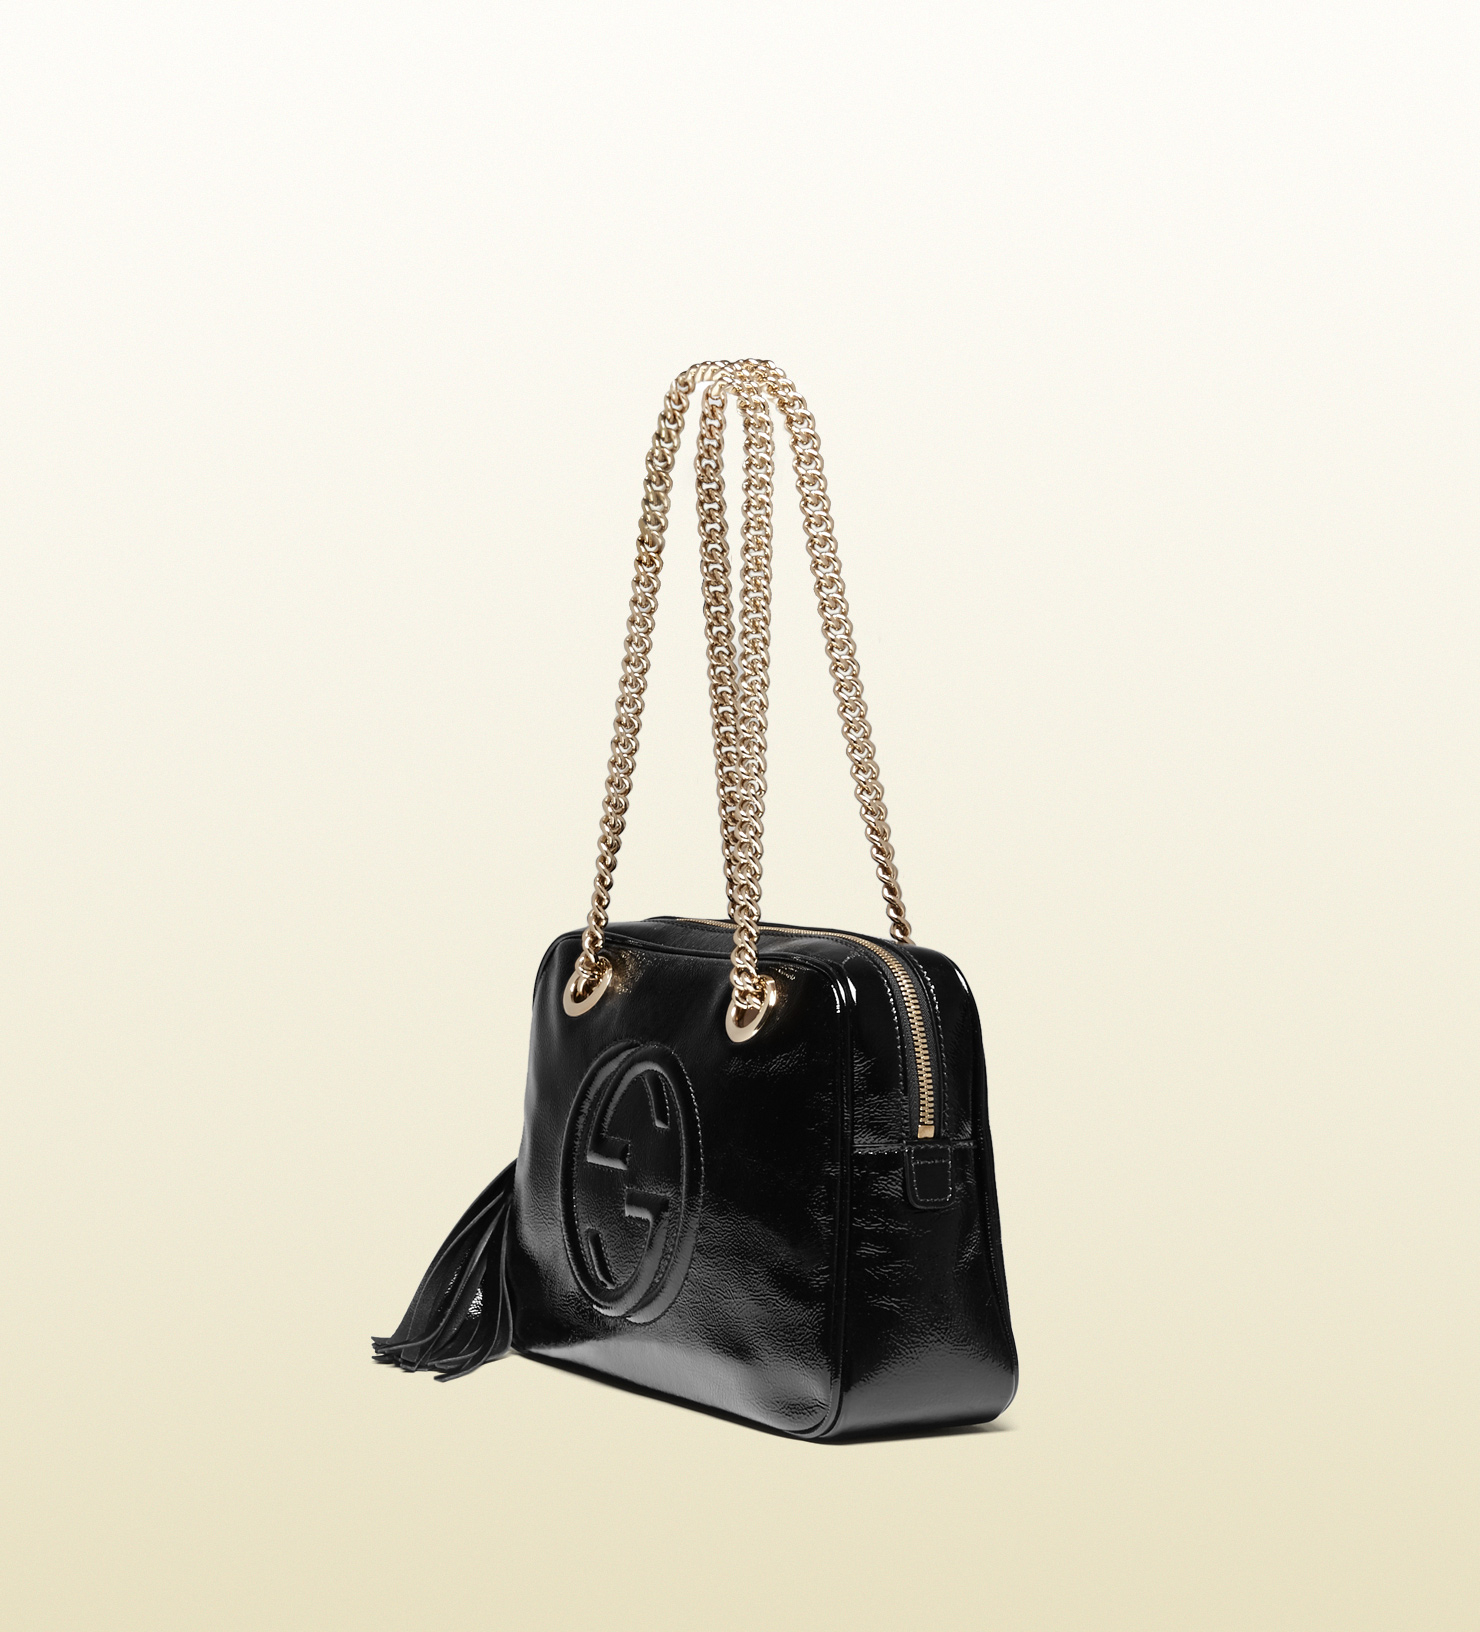 Gucci Soho Soft Patent Leather Chain Shoulder Bag in Black - Lyst